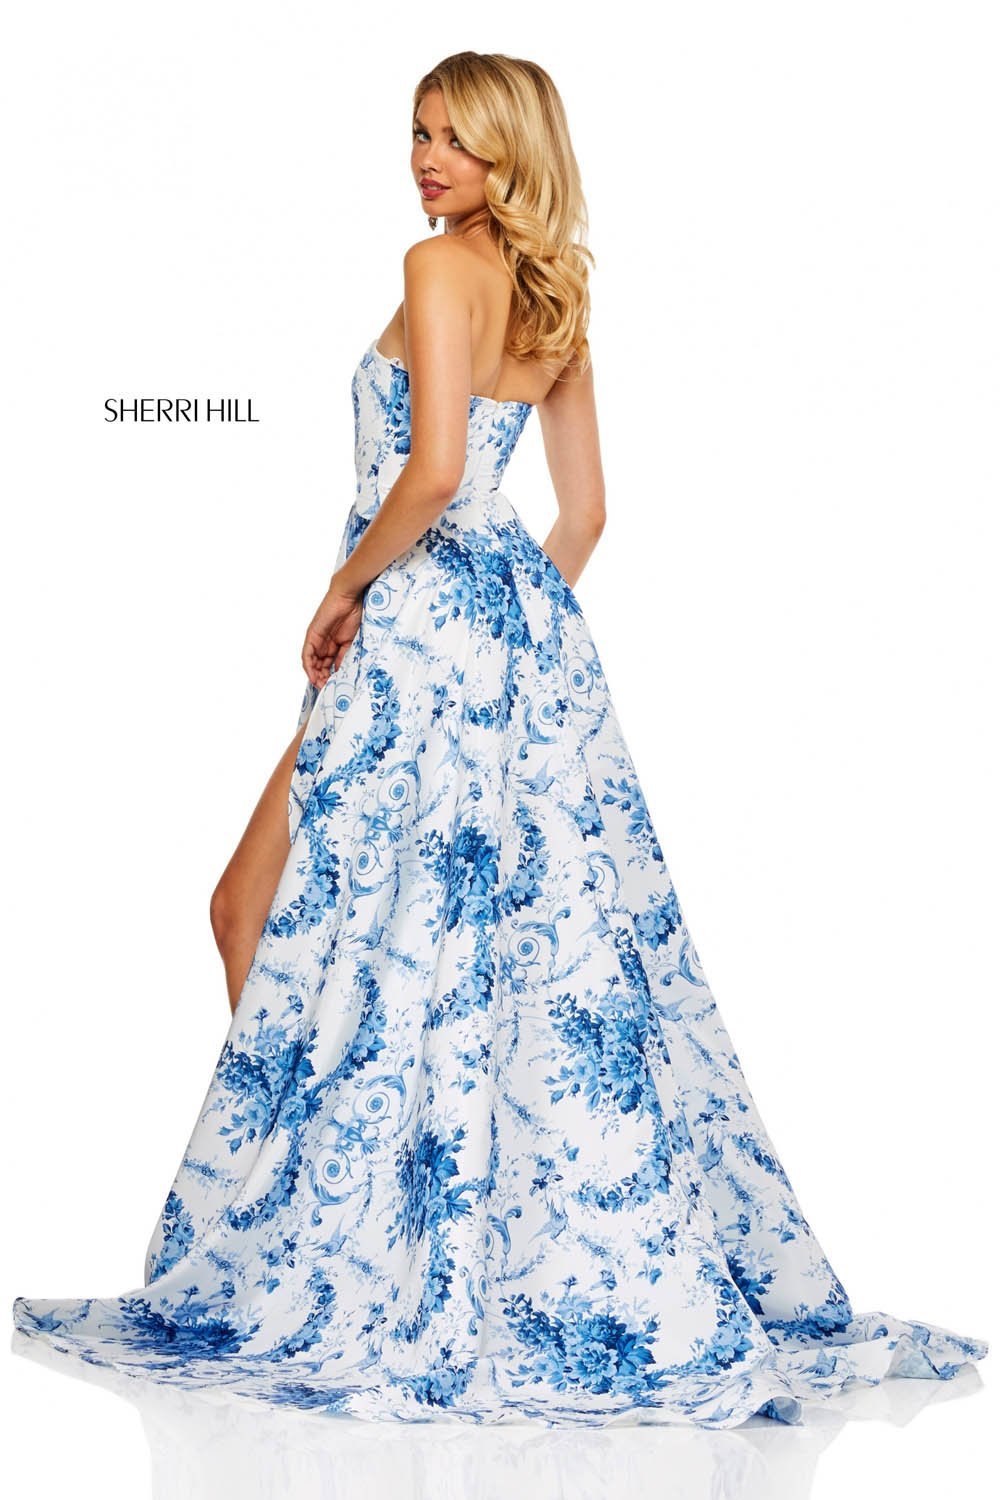 Sherri Hill 52532 dress images in these colors: Ivory Blue Print.